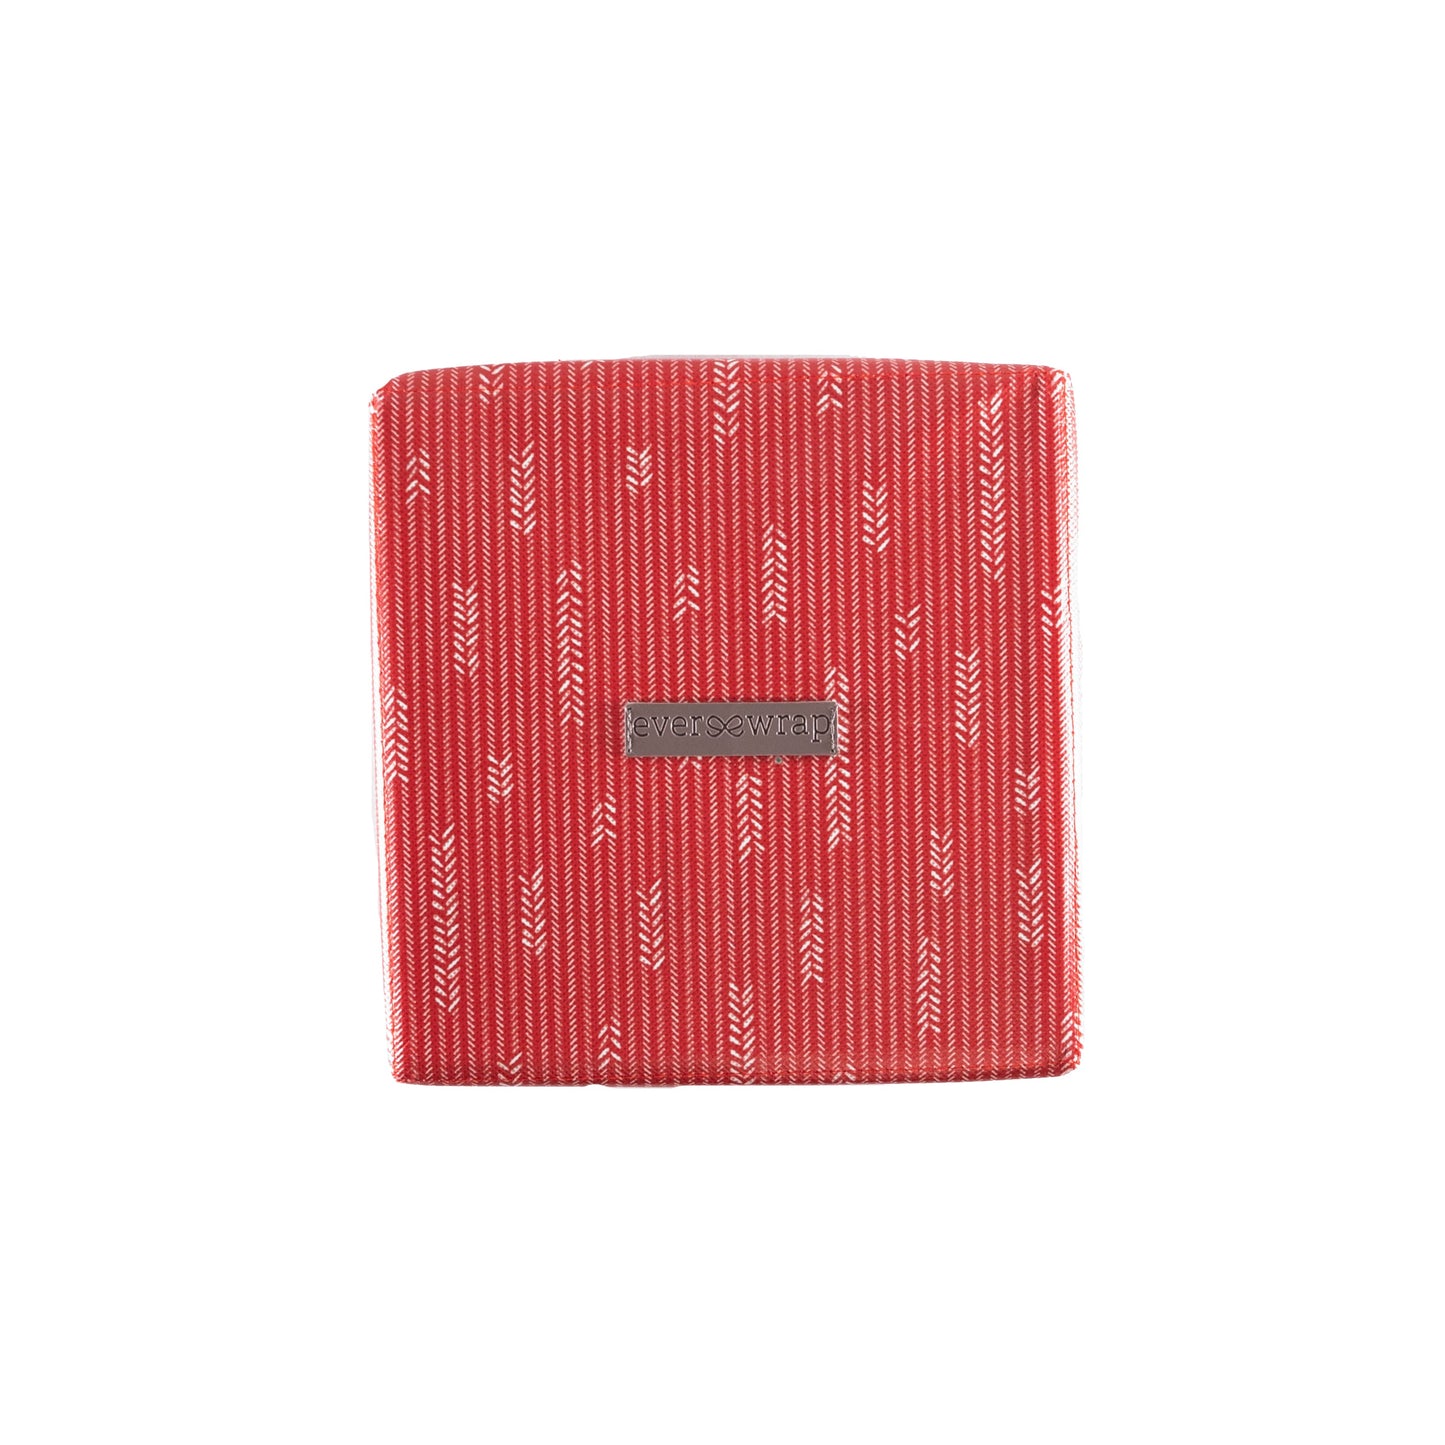 Small Red 8" Collapsible Gift Box with satin ribbon attached, great zero waste solution for sustainable and eco-friendly gift boxes - EverWrap